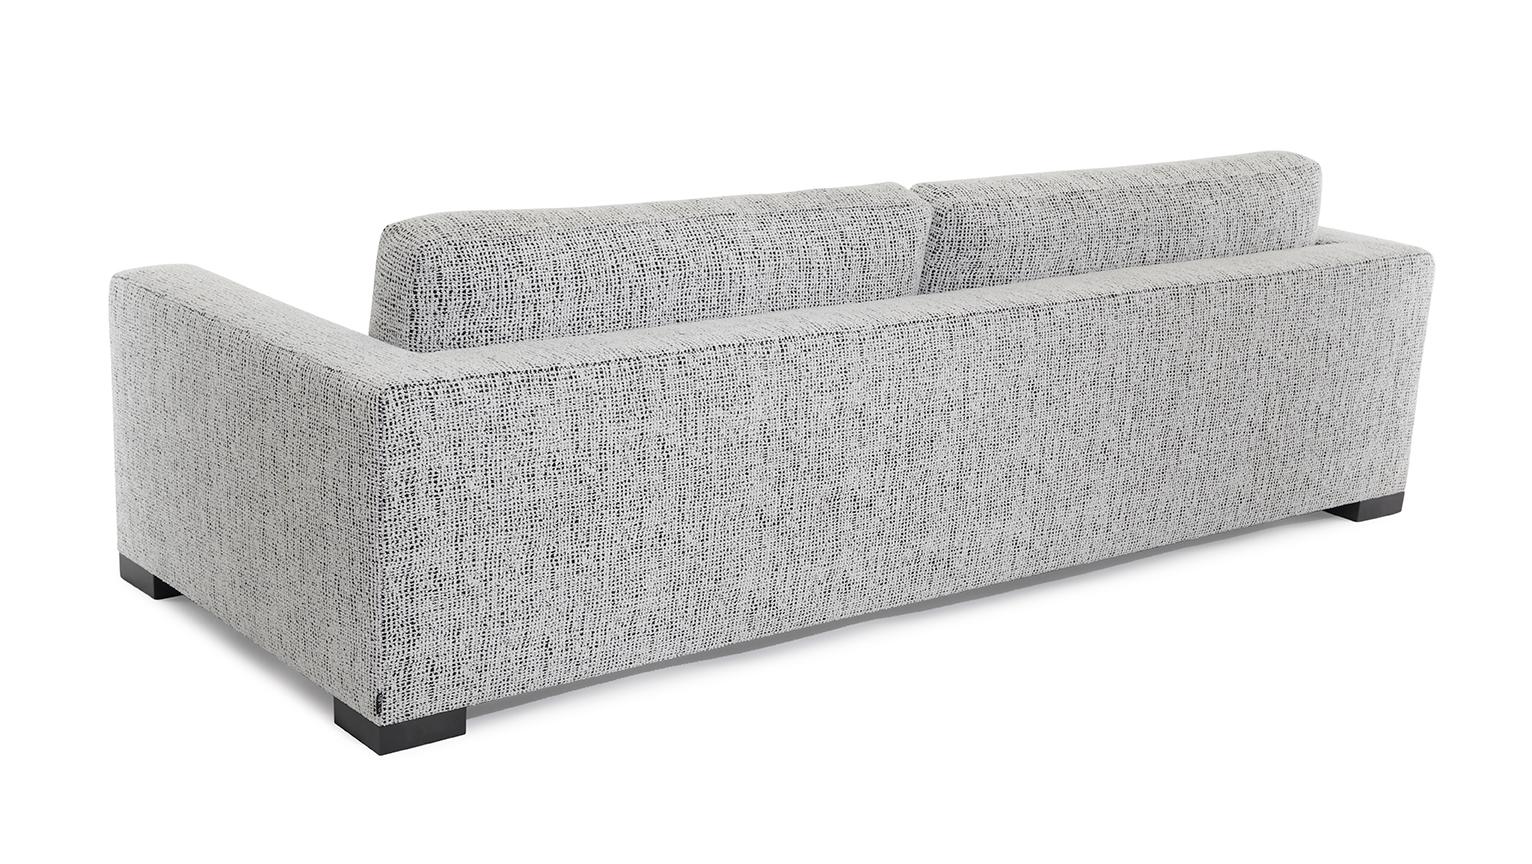 Other Hudson Sofa Loose Seat Cushions, Box Legs For Sale